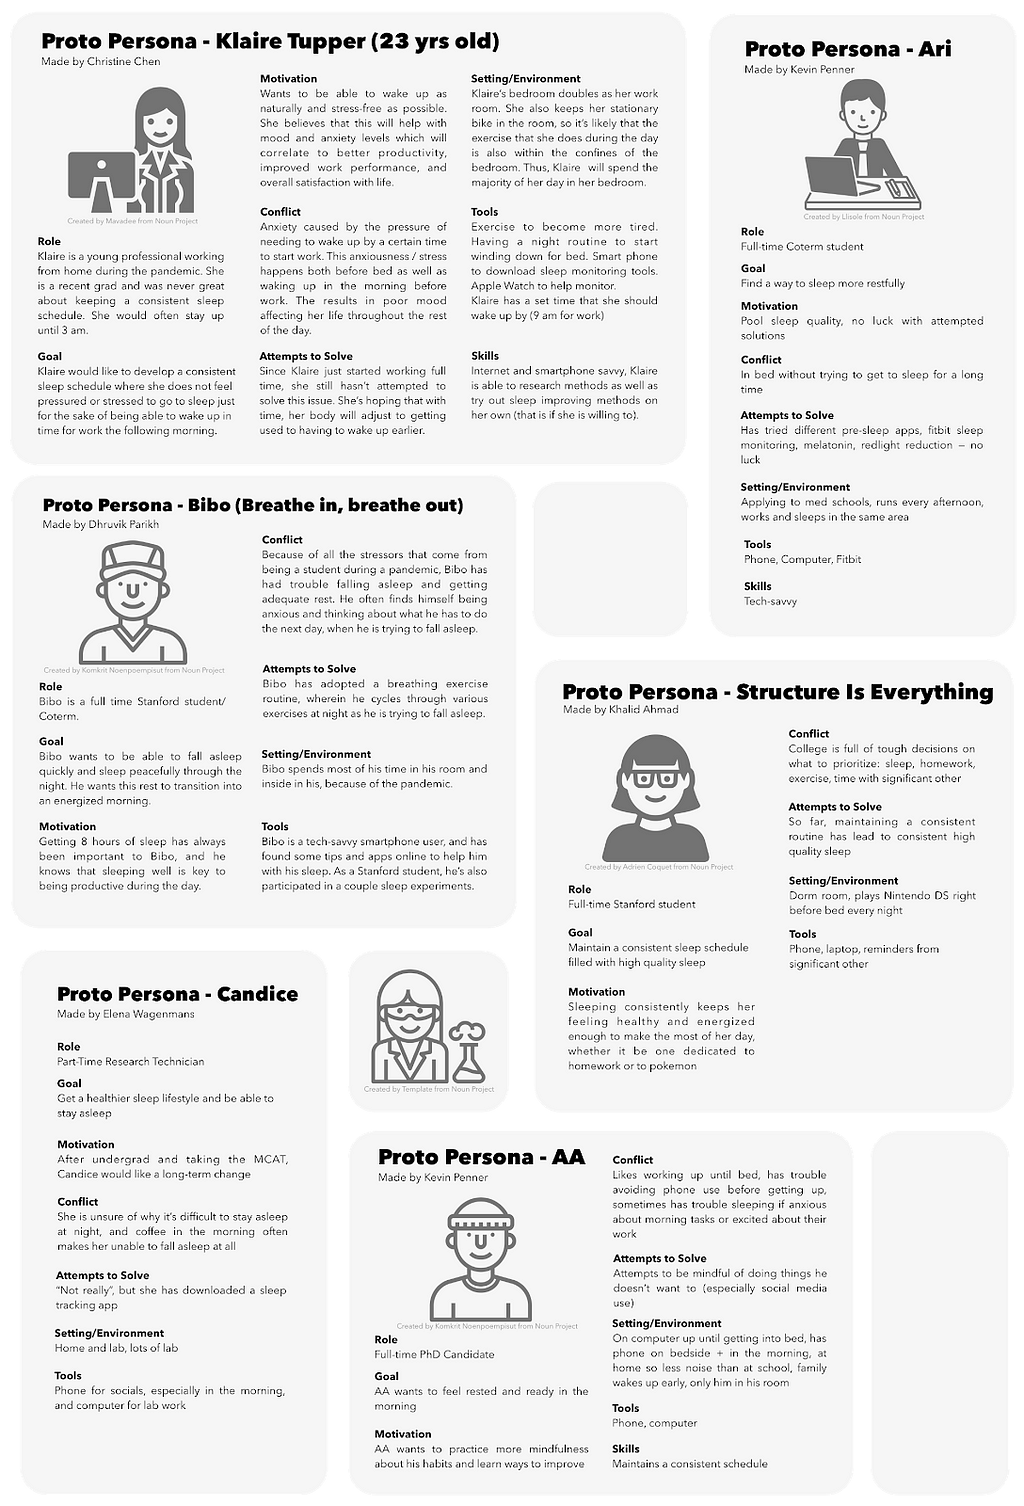 Proto Personas of 5 people, describing their background, sleep behaviors, motivation, setting and environment, attempts to solve, and general tools